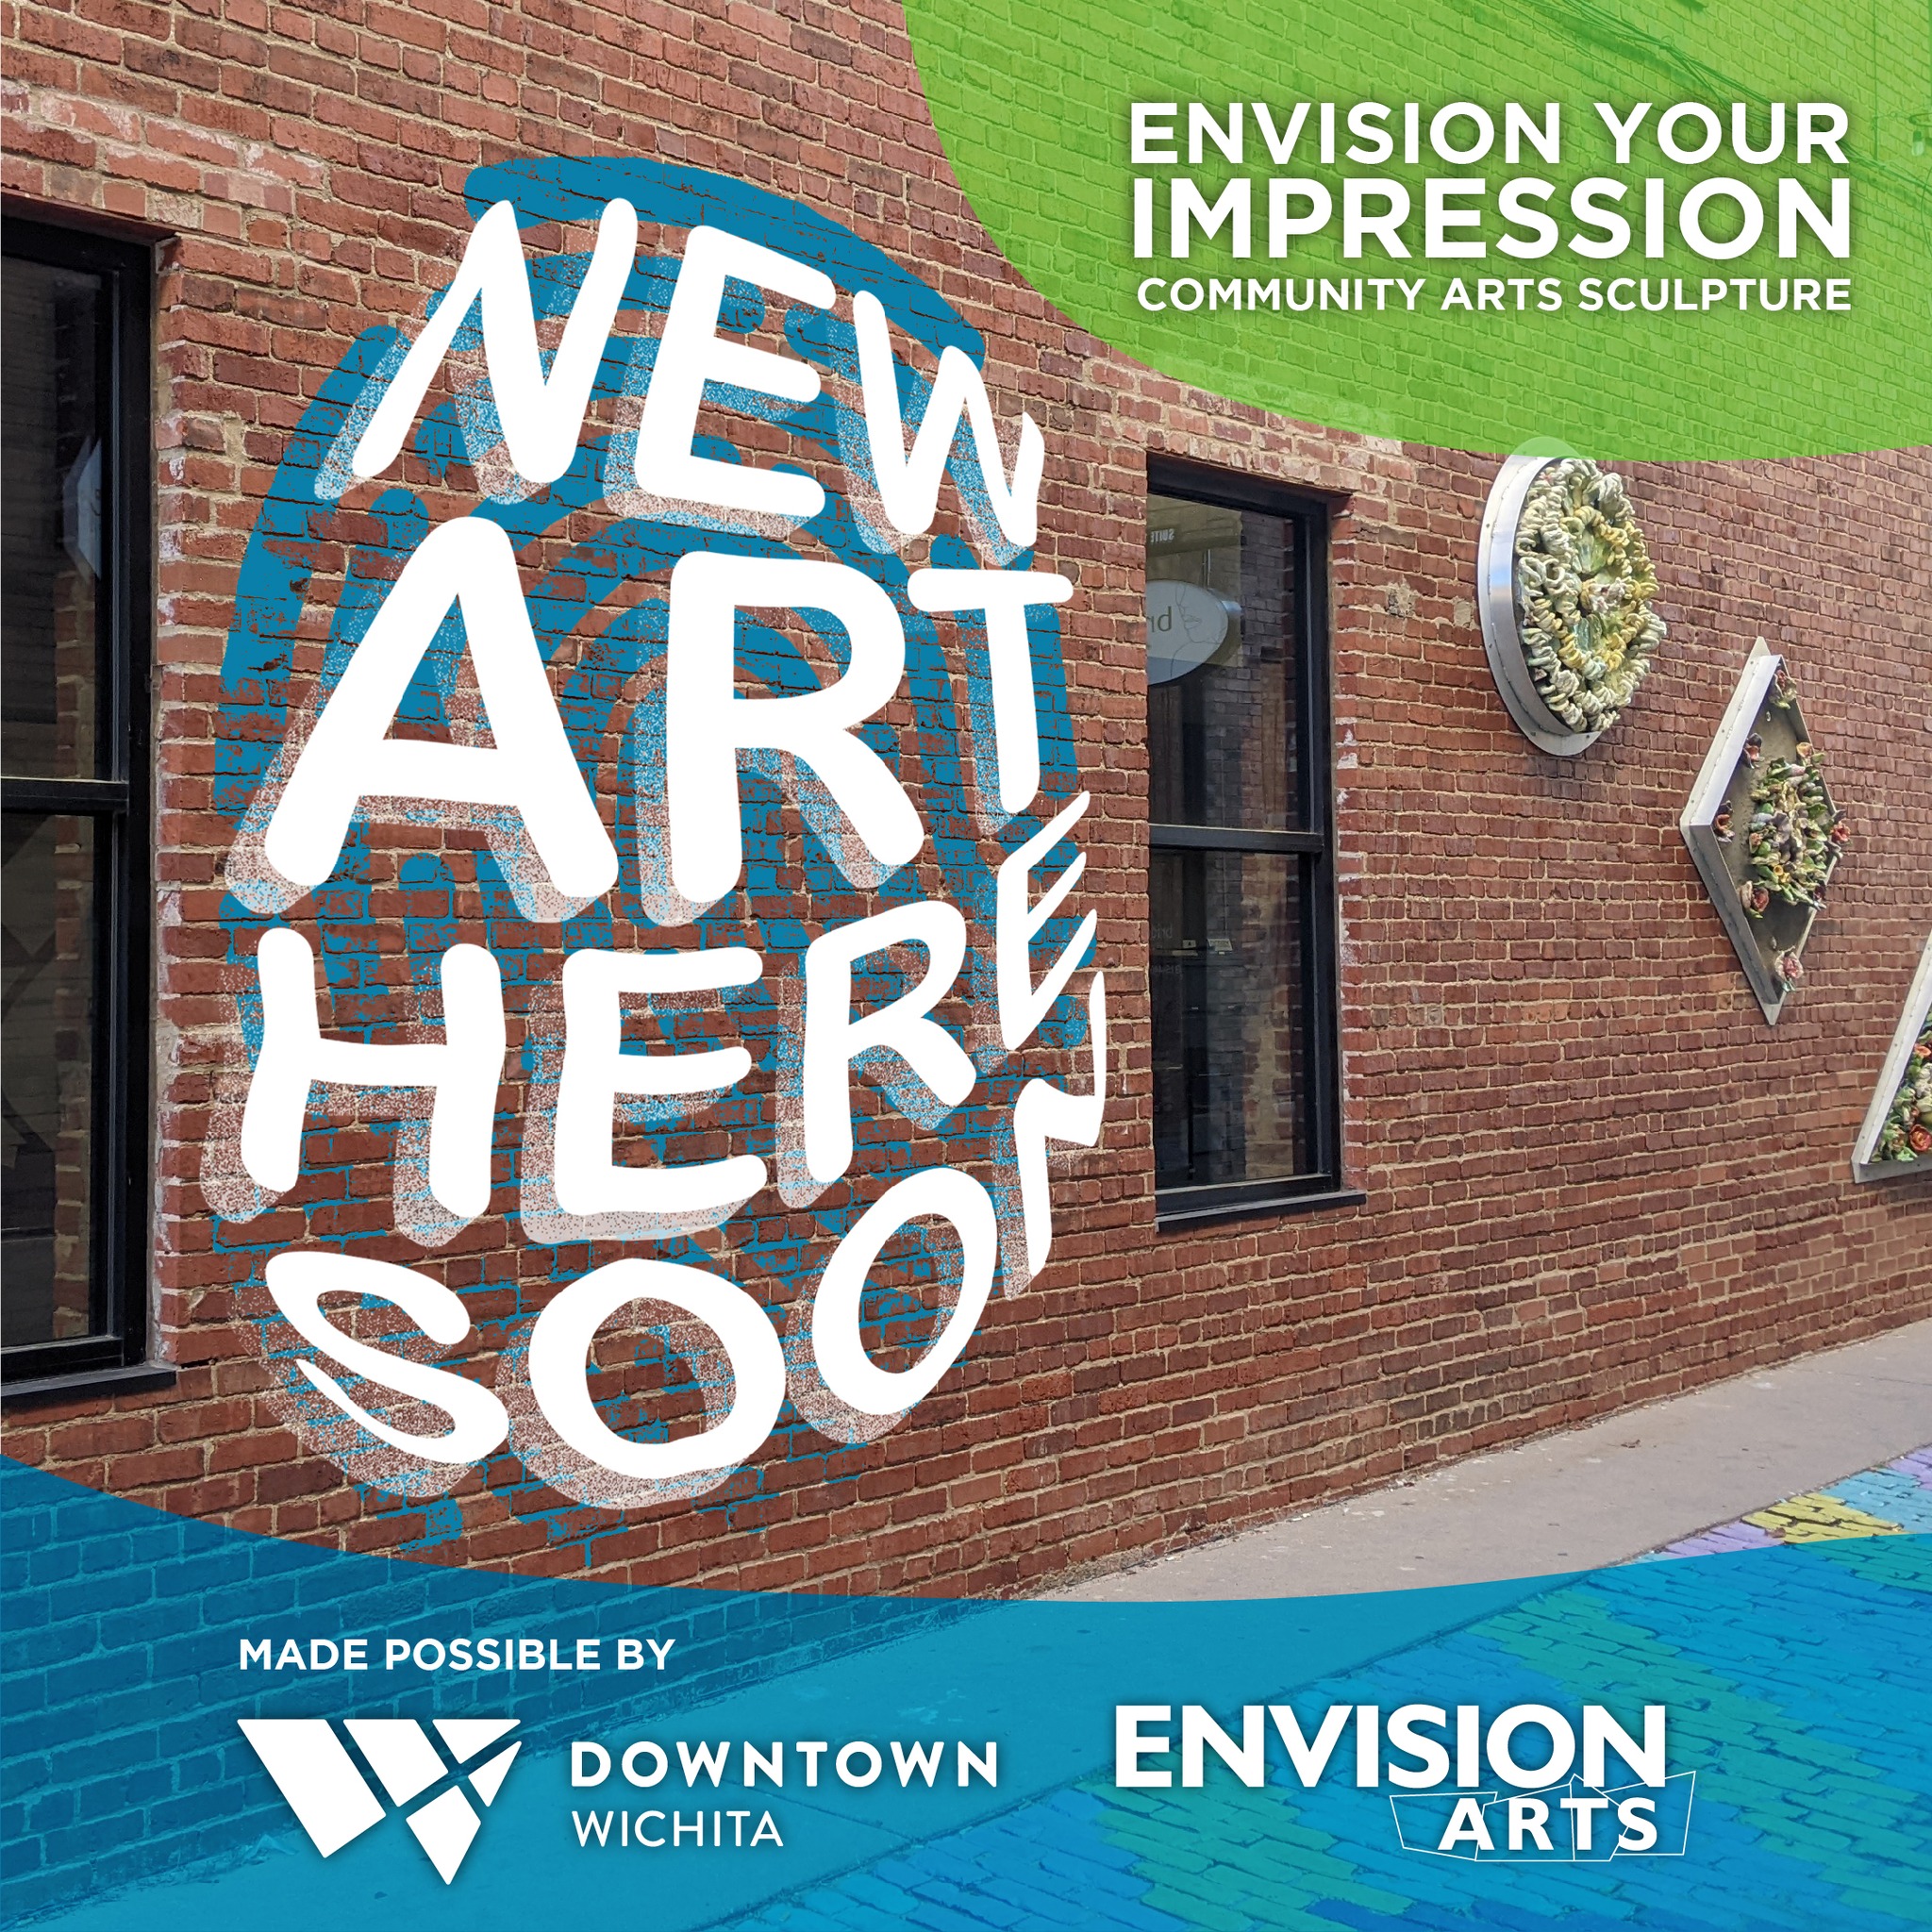 Gallery Alley wall with a graphic overlay that says new art here soon and text in the corner, "Envision Your Impression" Community Arts Sculpture